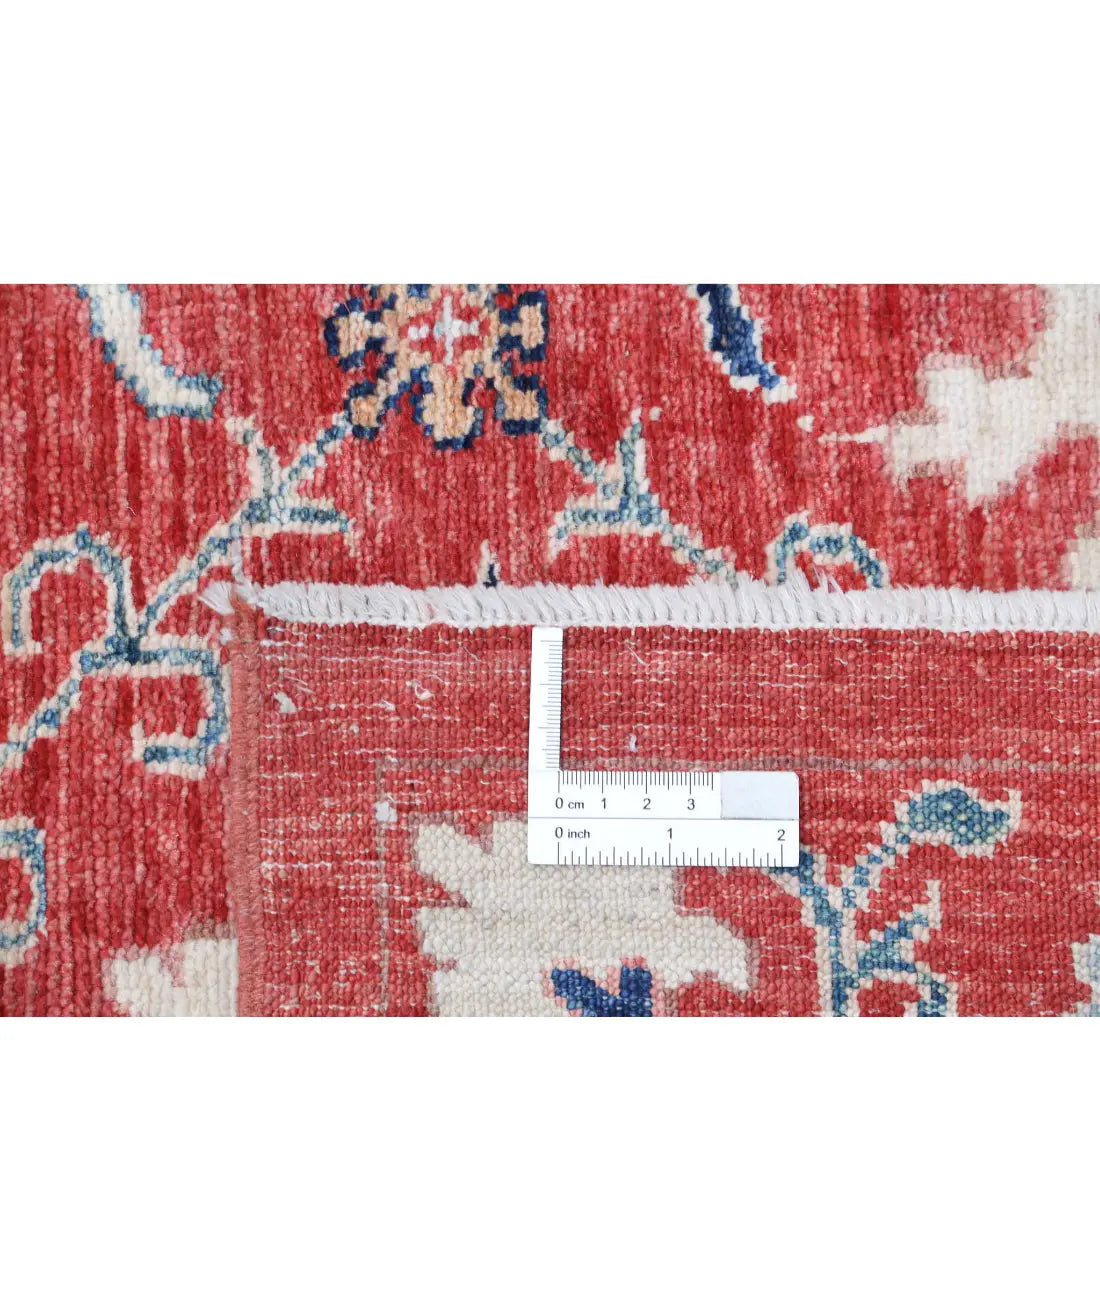 Hand Knotted Artemix Wool Rug - 8'5'' x 11'5''